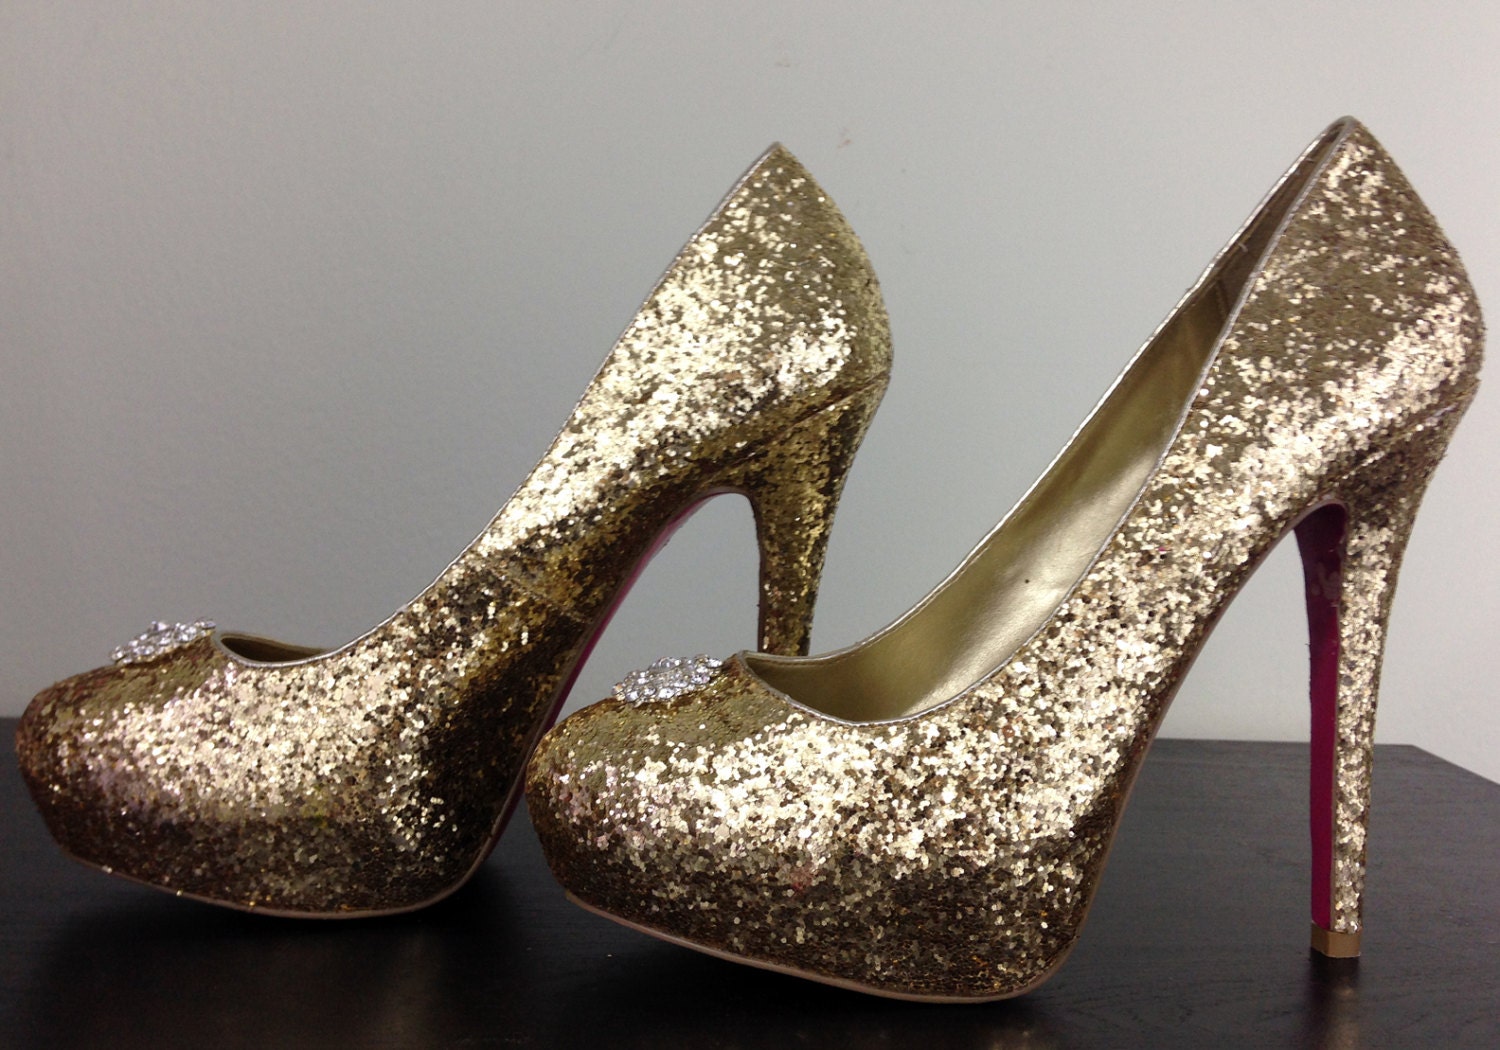 Sparkly Gold Heels with Added Rhinestone Detail at Toe - DelilahBurlesque